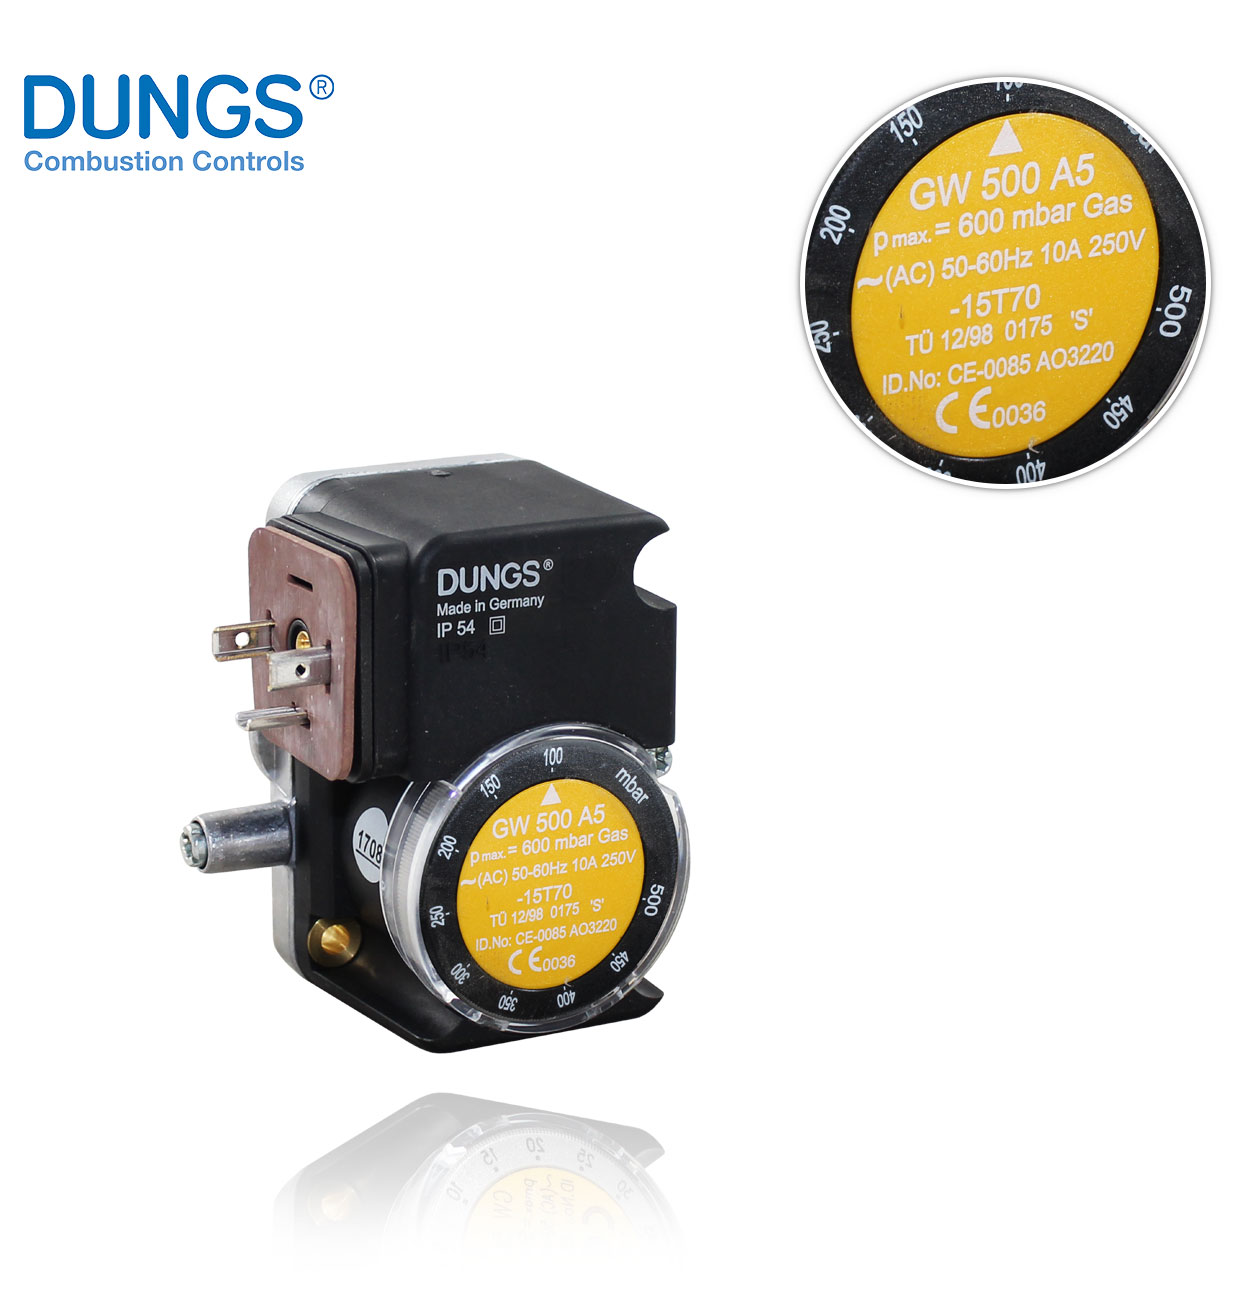 GW 500 A5 DUNGS PRESSURE SWITCH